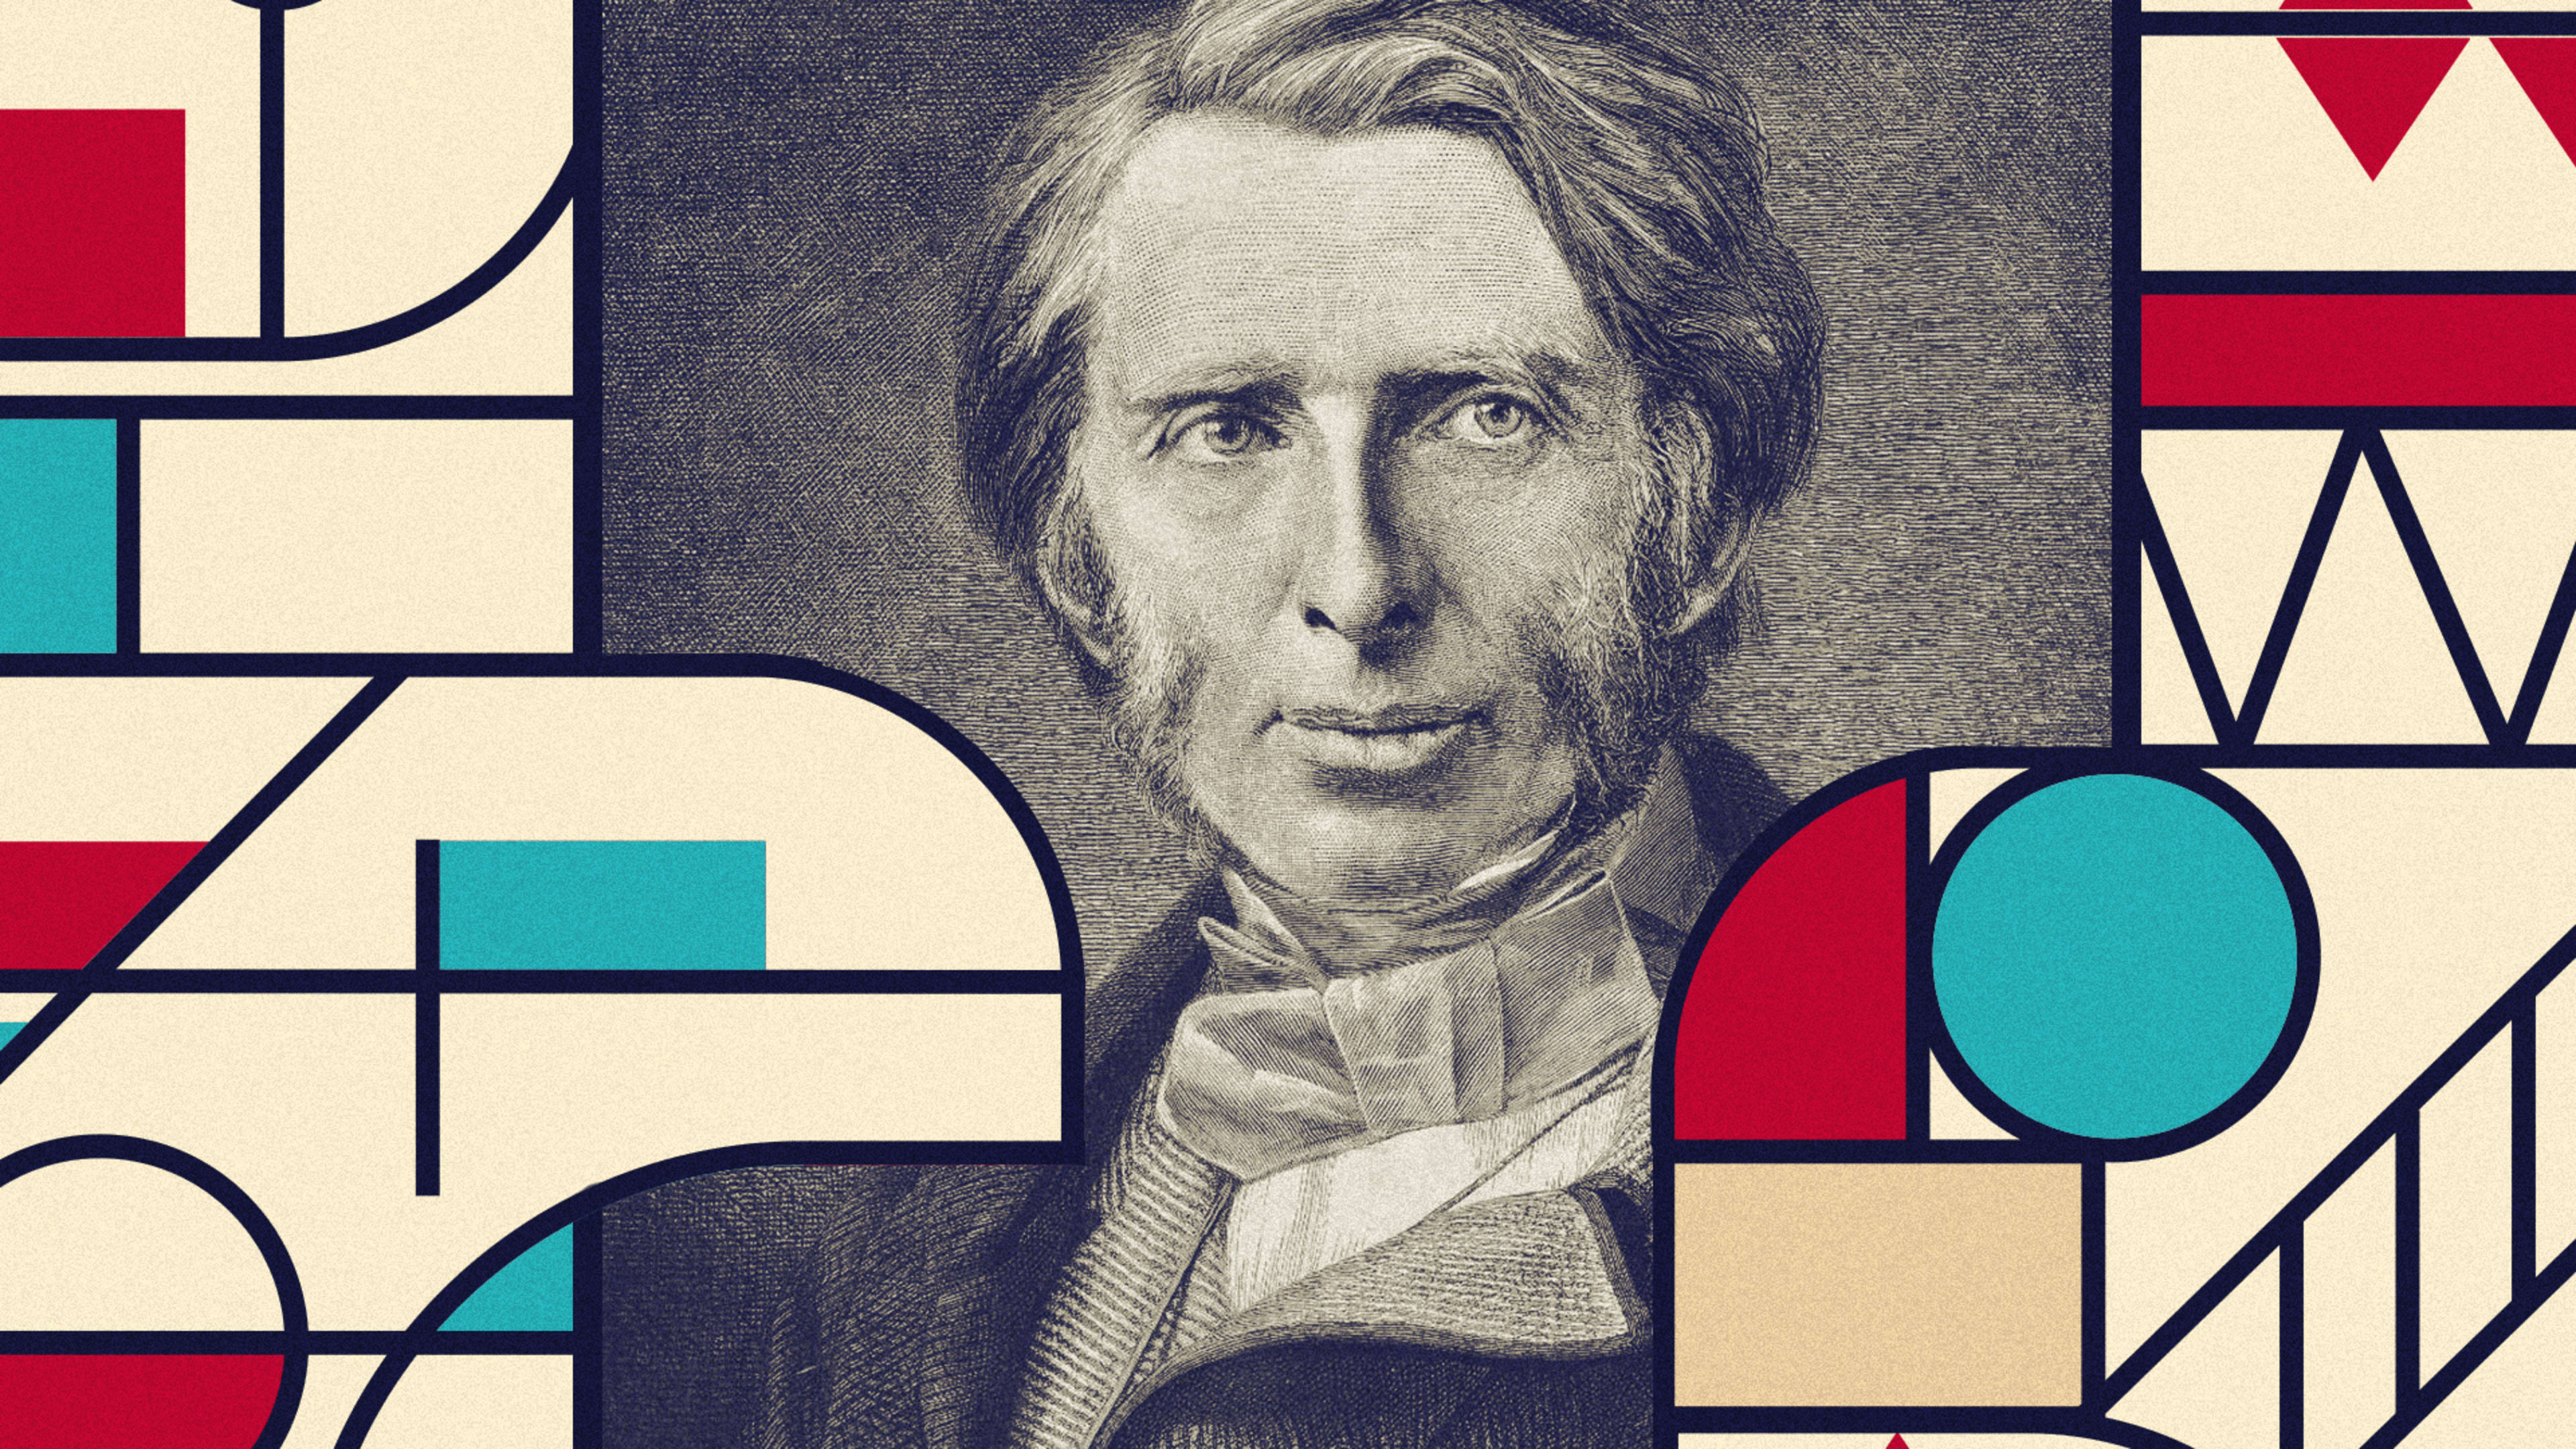 The freshest writer on design was born 200 years ago